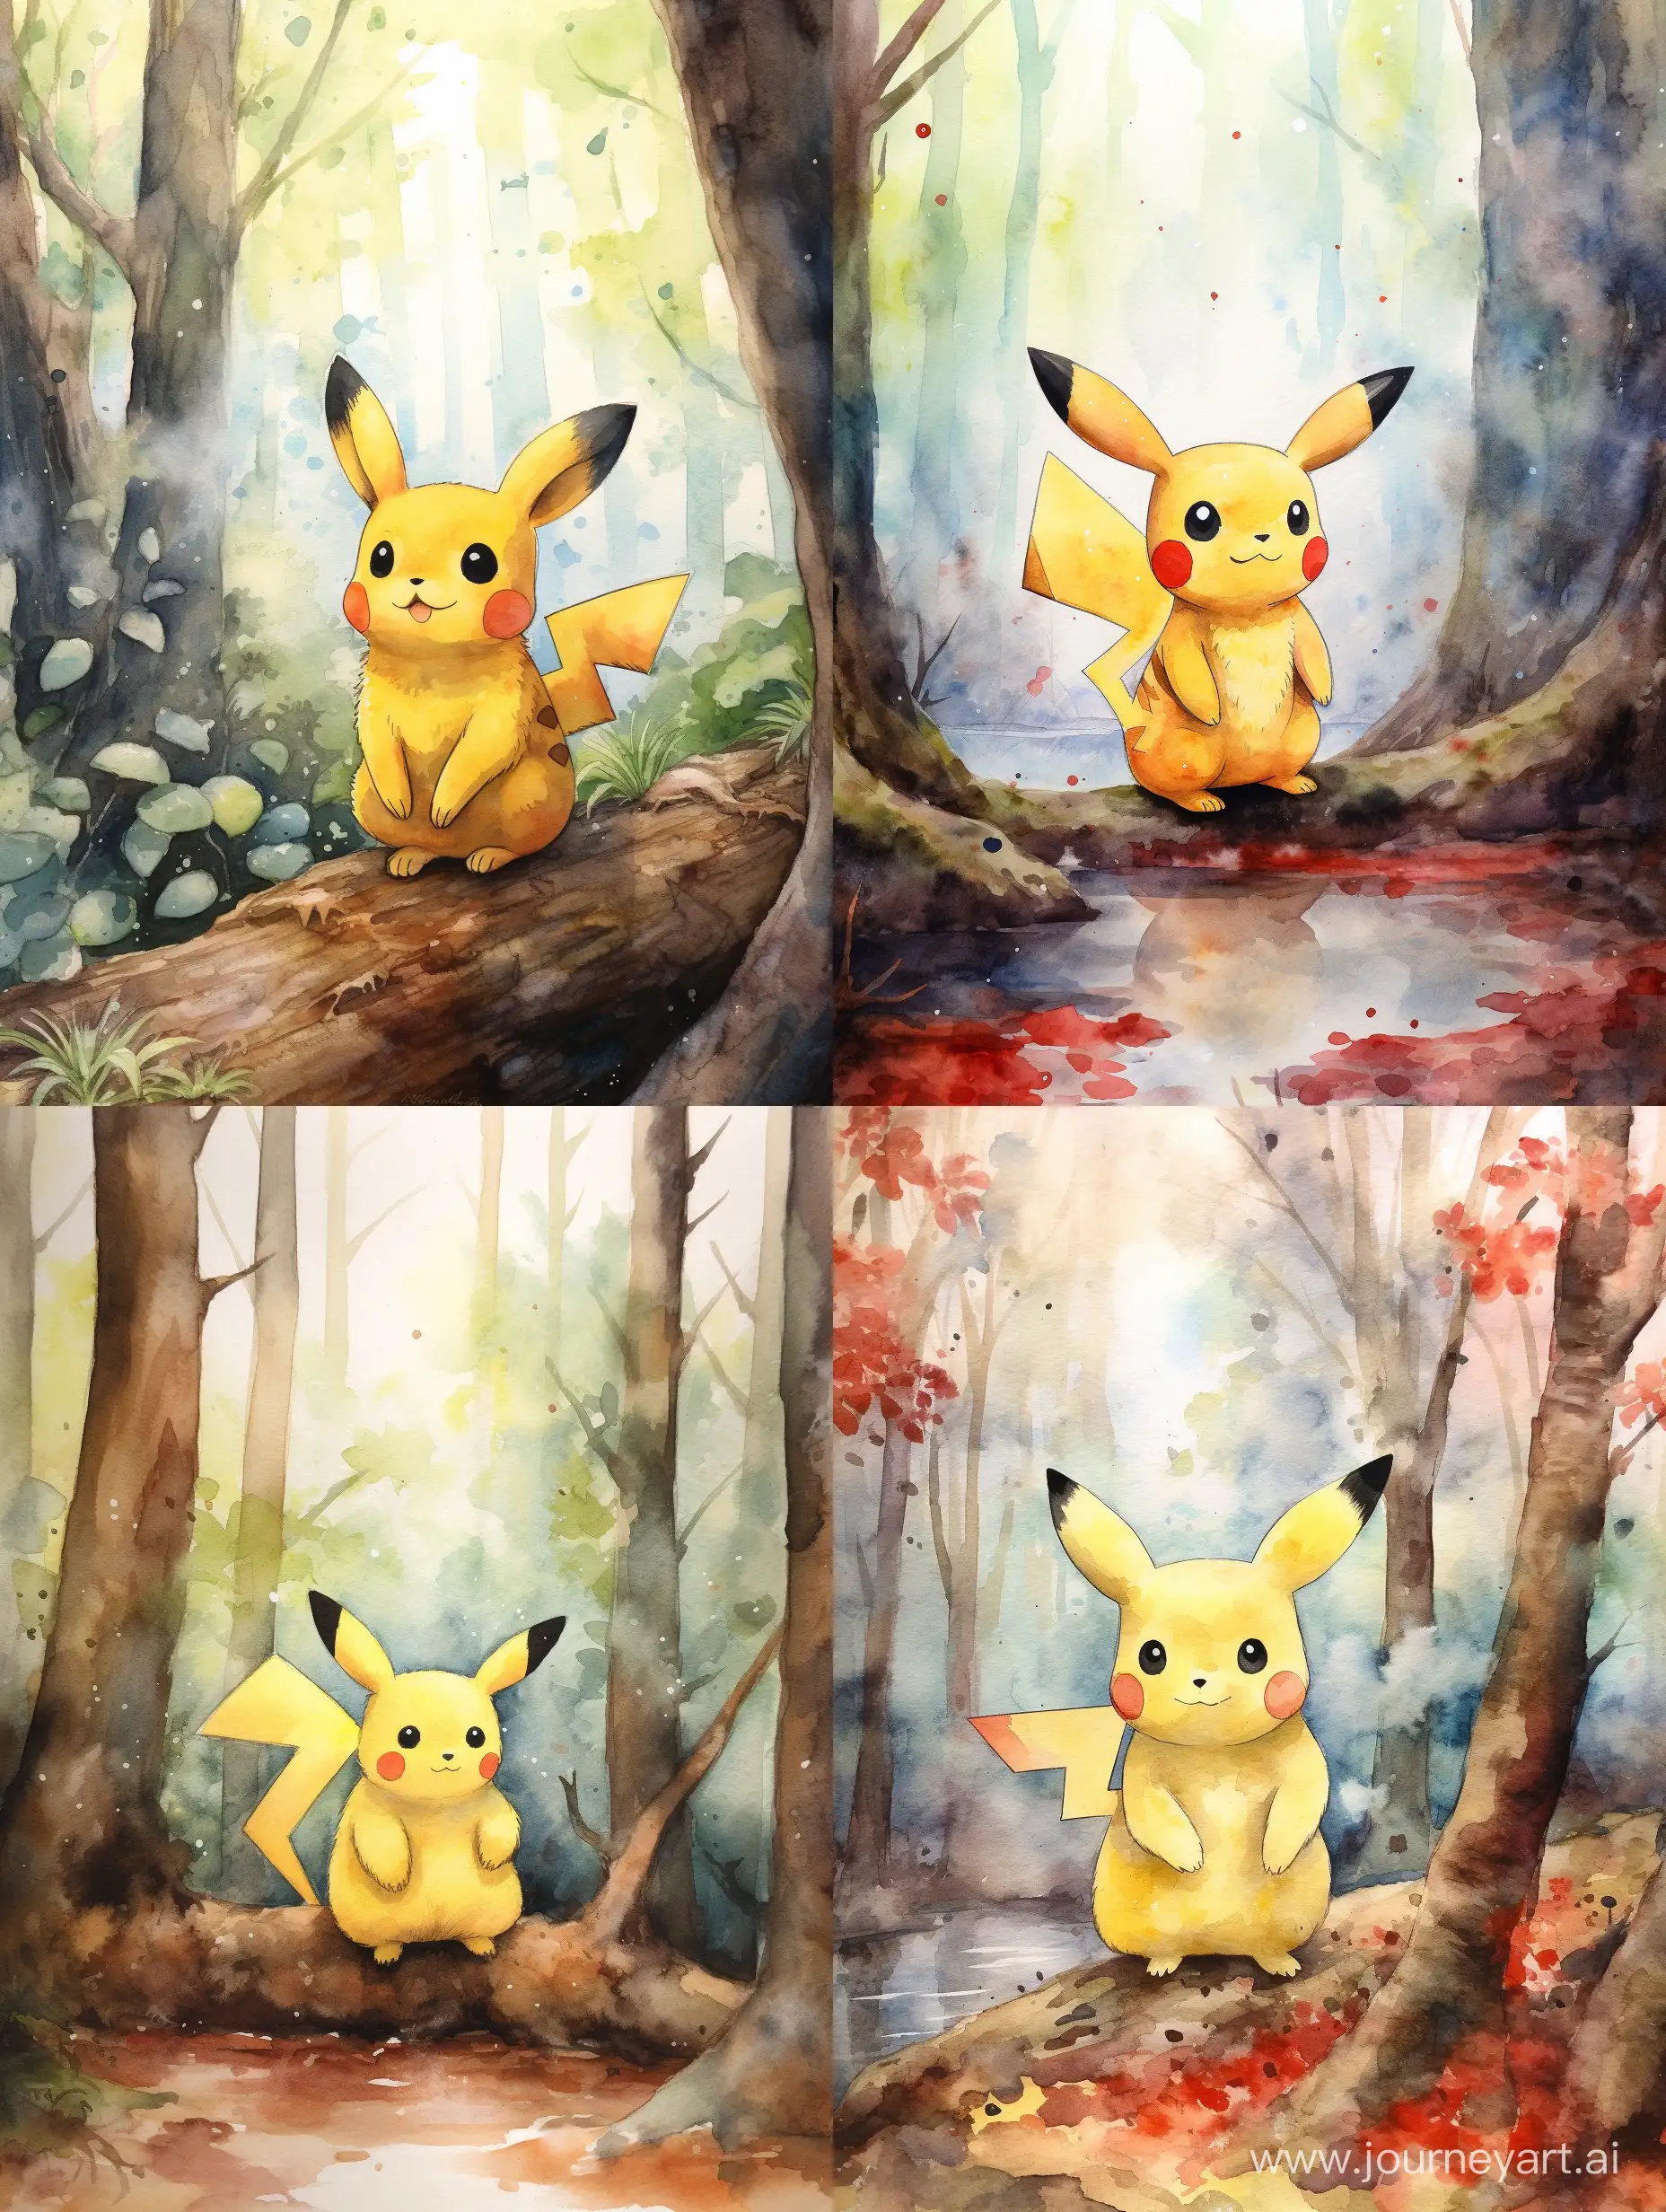 Enchanting-Watercolor-Depiction-of-Pikachu-in-a-Lush-Forest